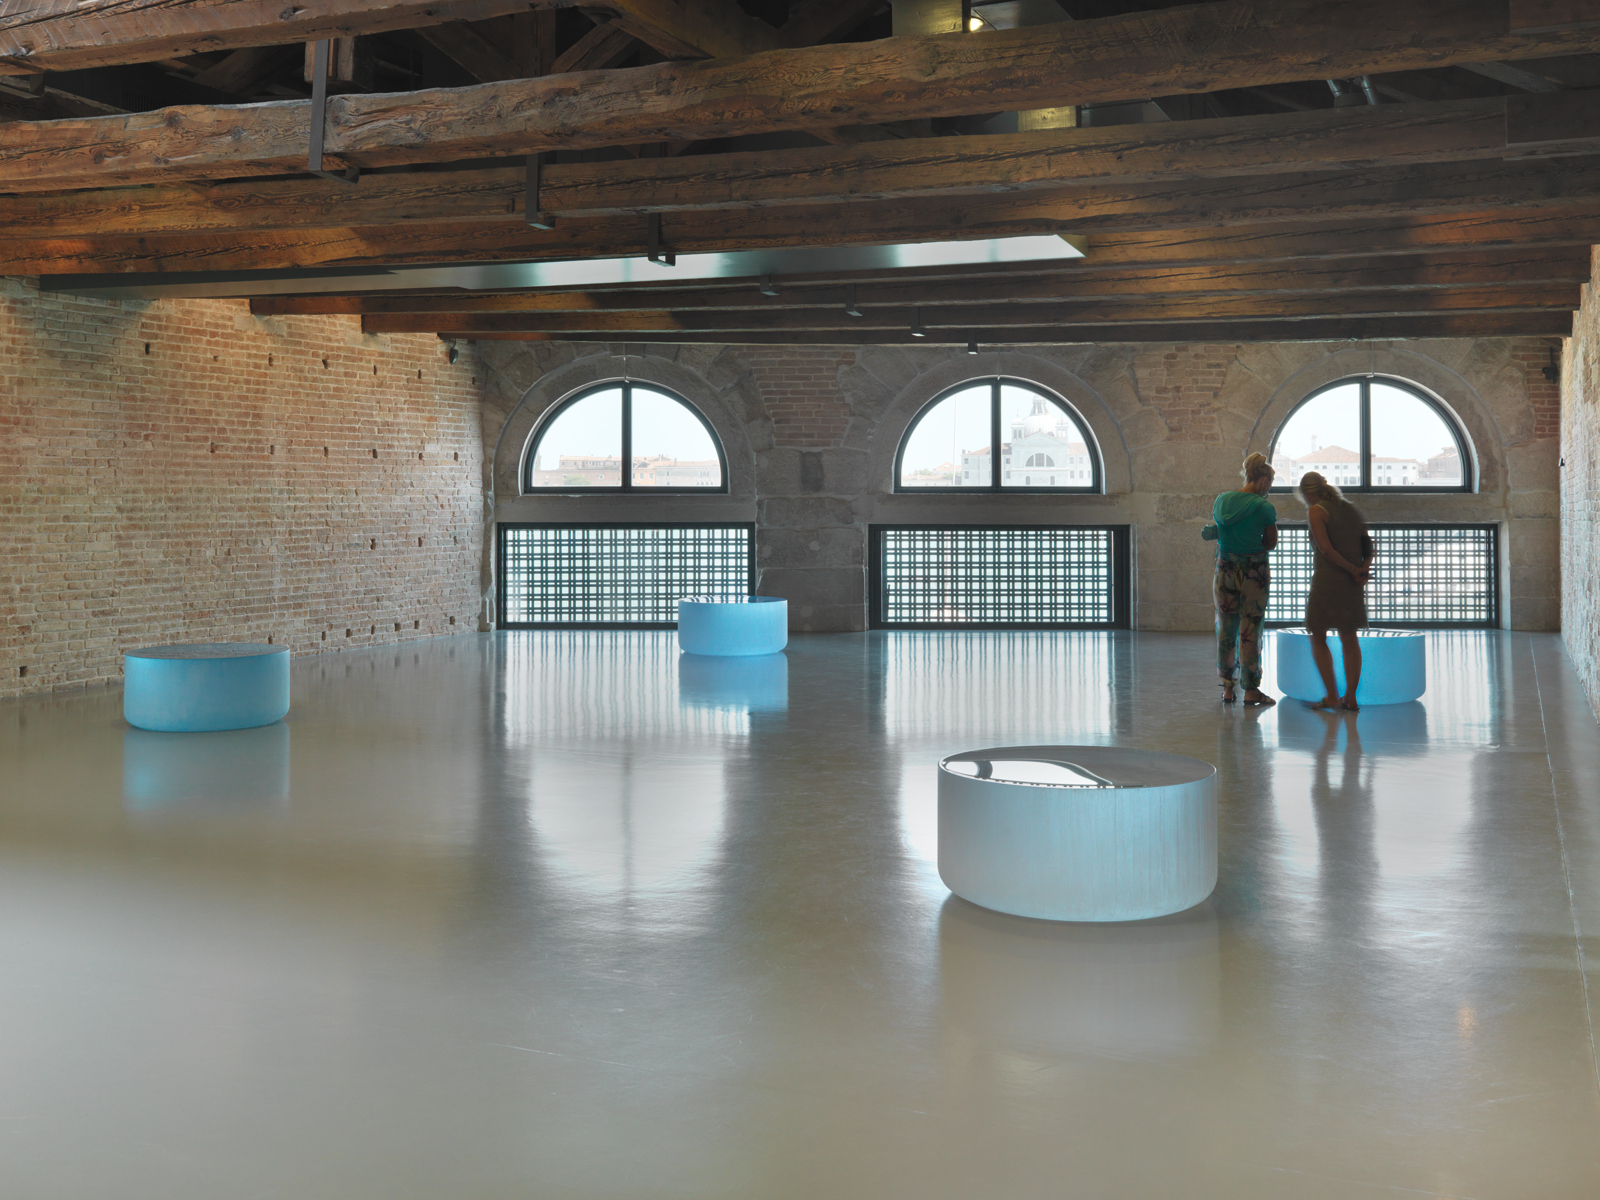 Roni Horn / Well and Truly, installation view, "In Praise of Doubt", Punta Della Dogana, Venice, 2011 / 2009-2010